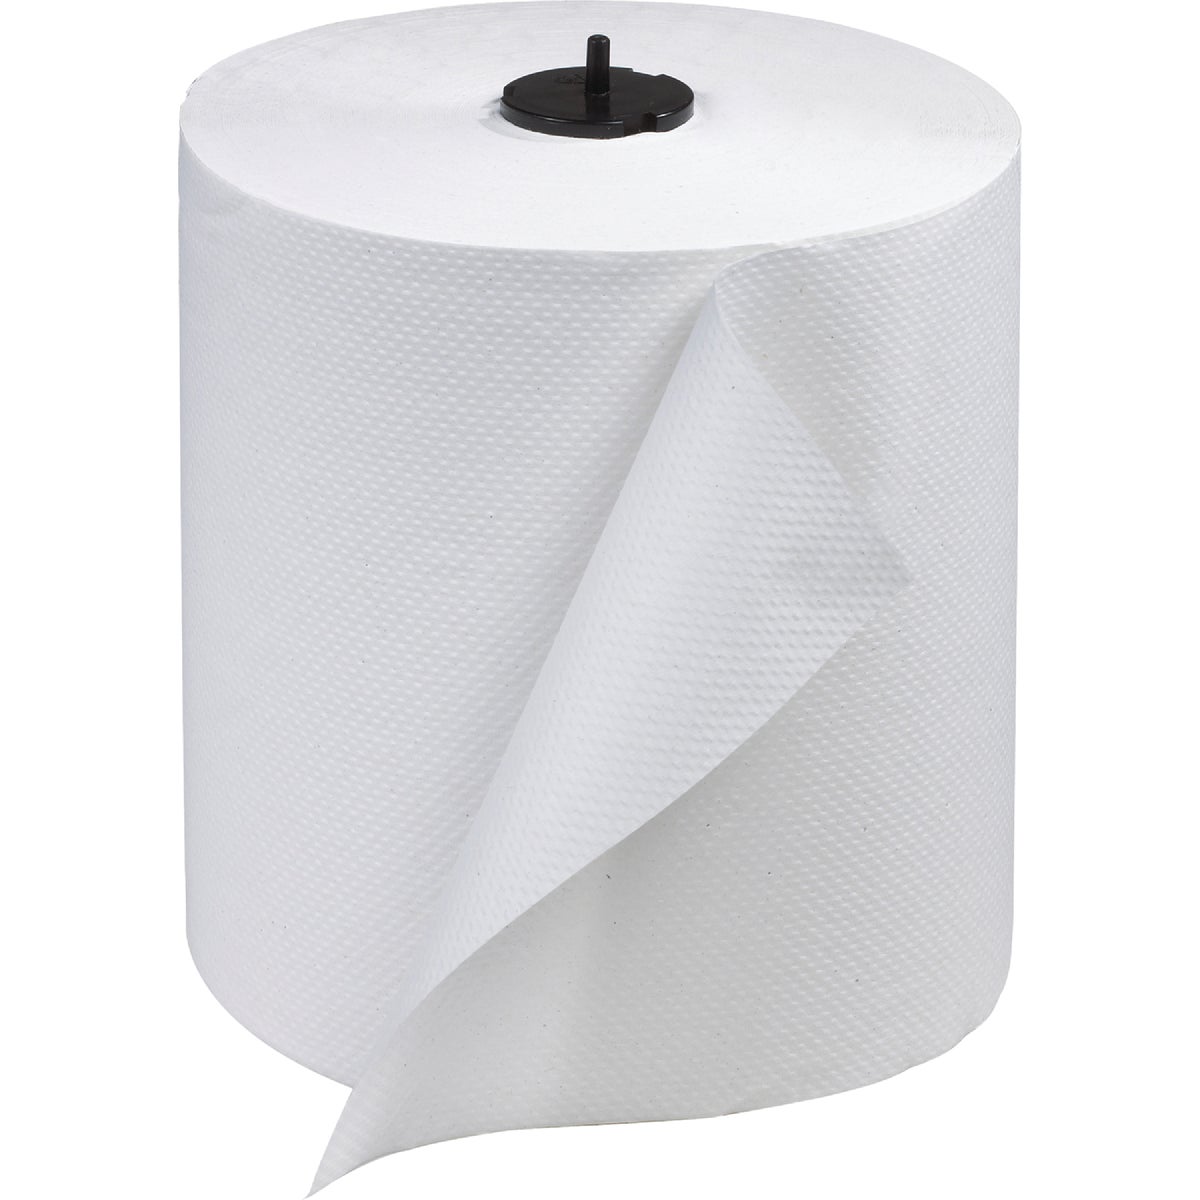 SCA Tork White Advanced Roll Towels (6-Count)